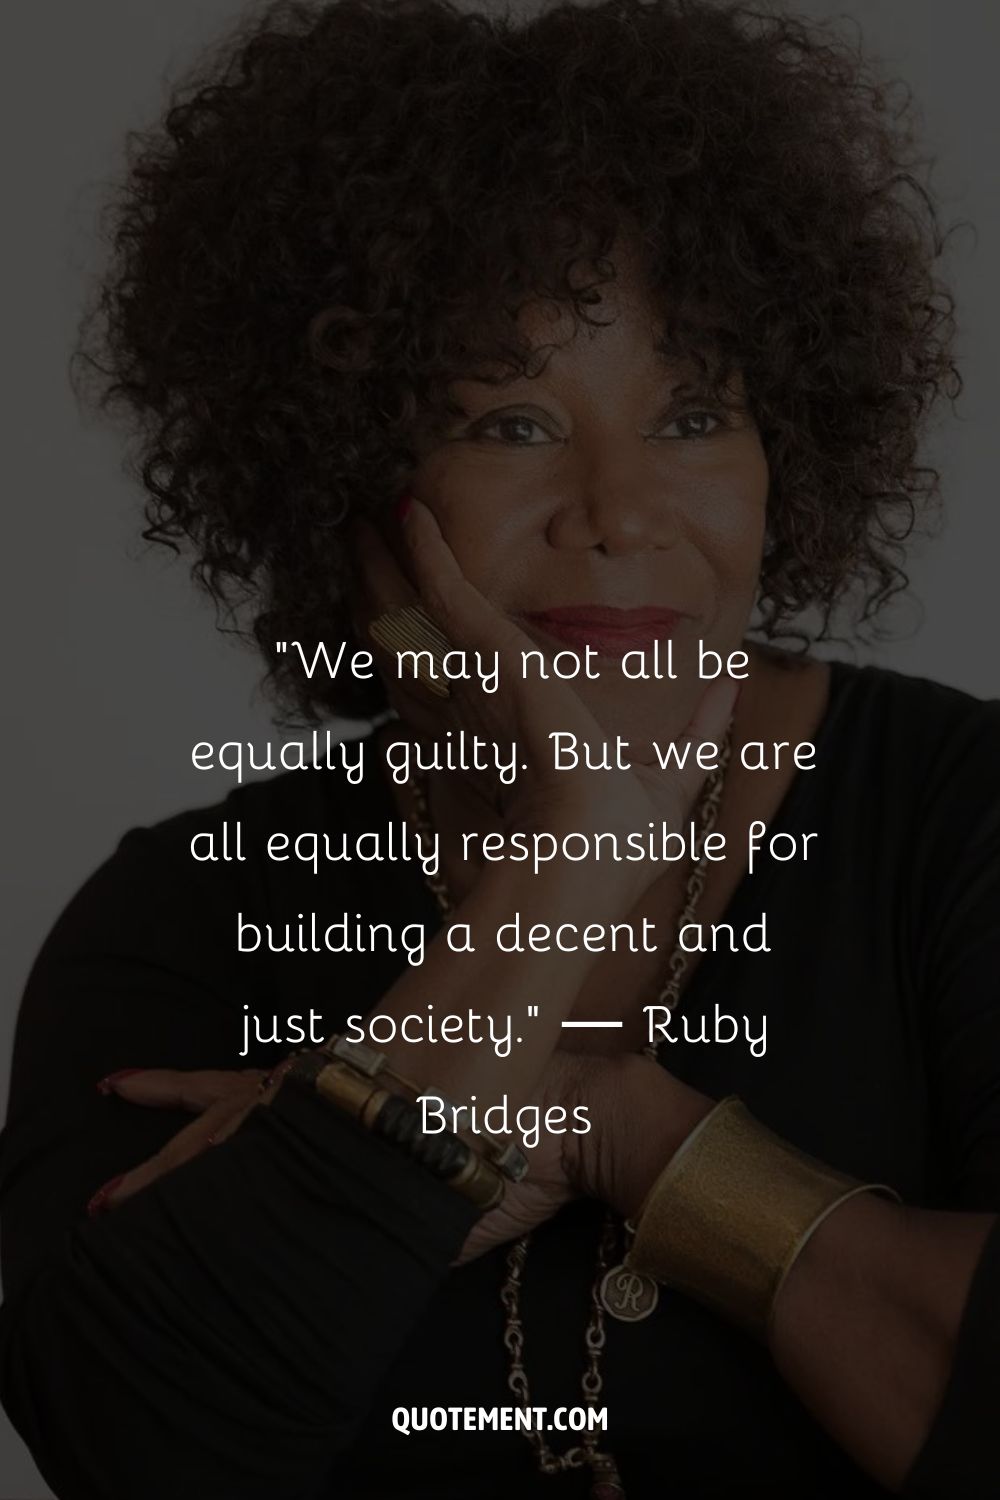 We may not all be equally guilty.